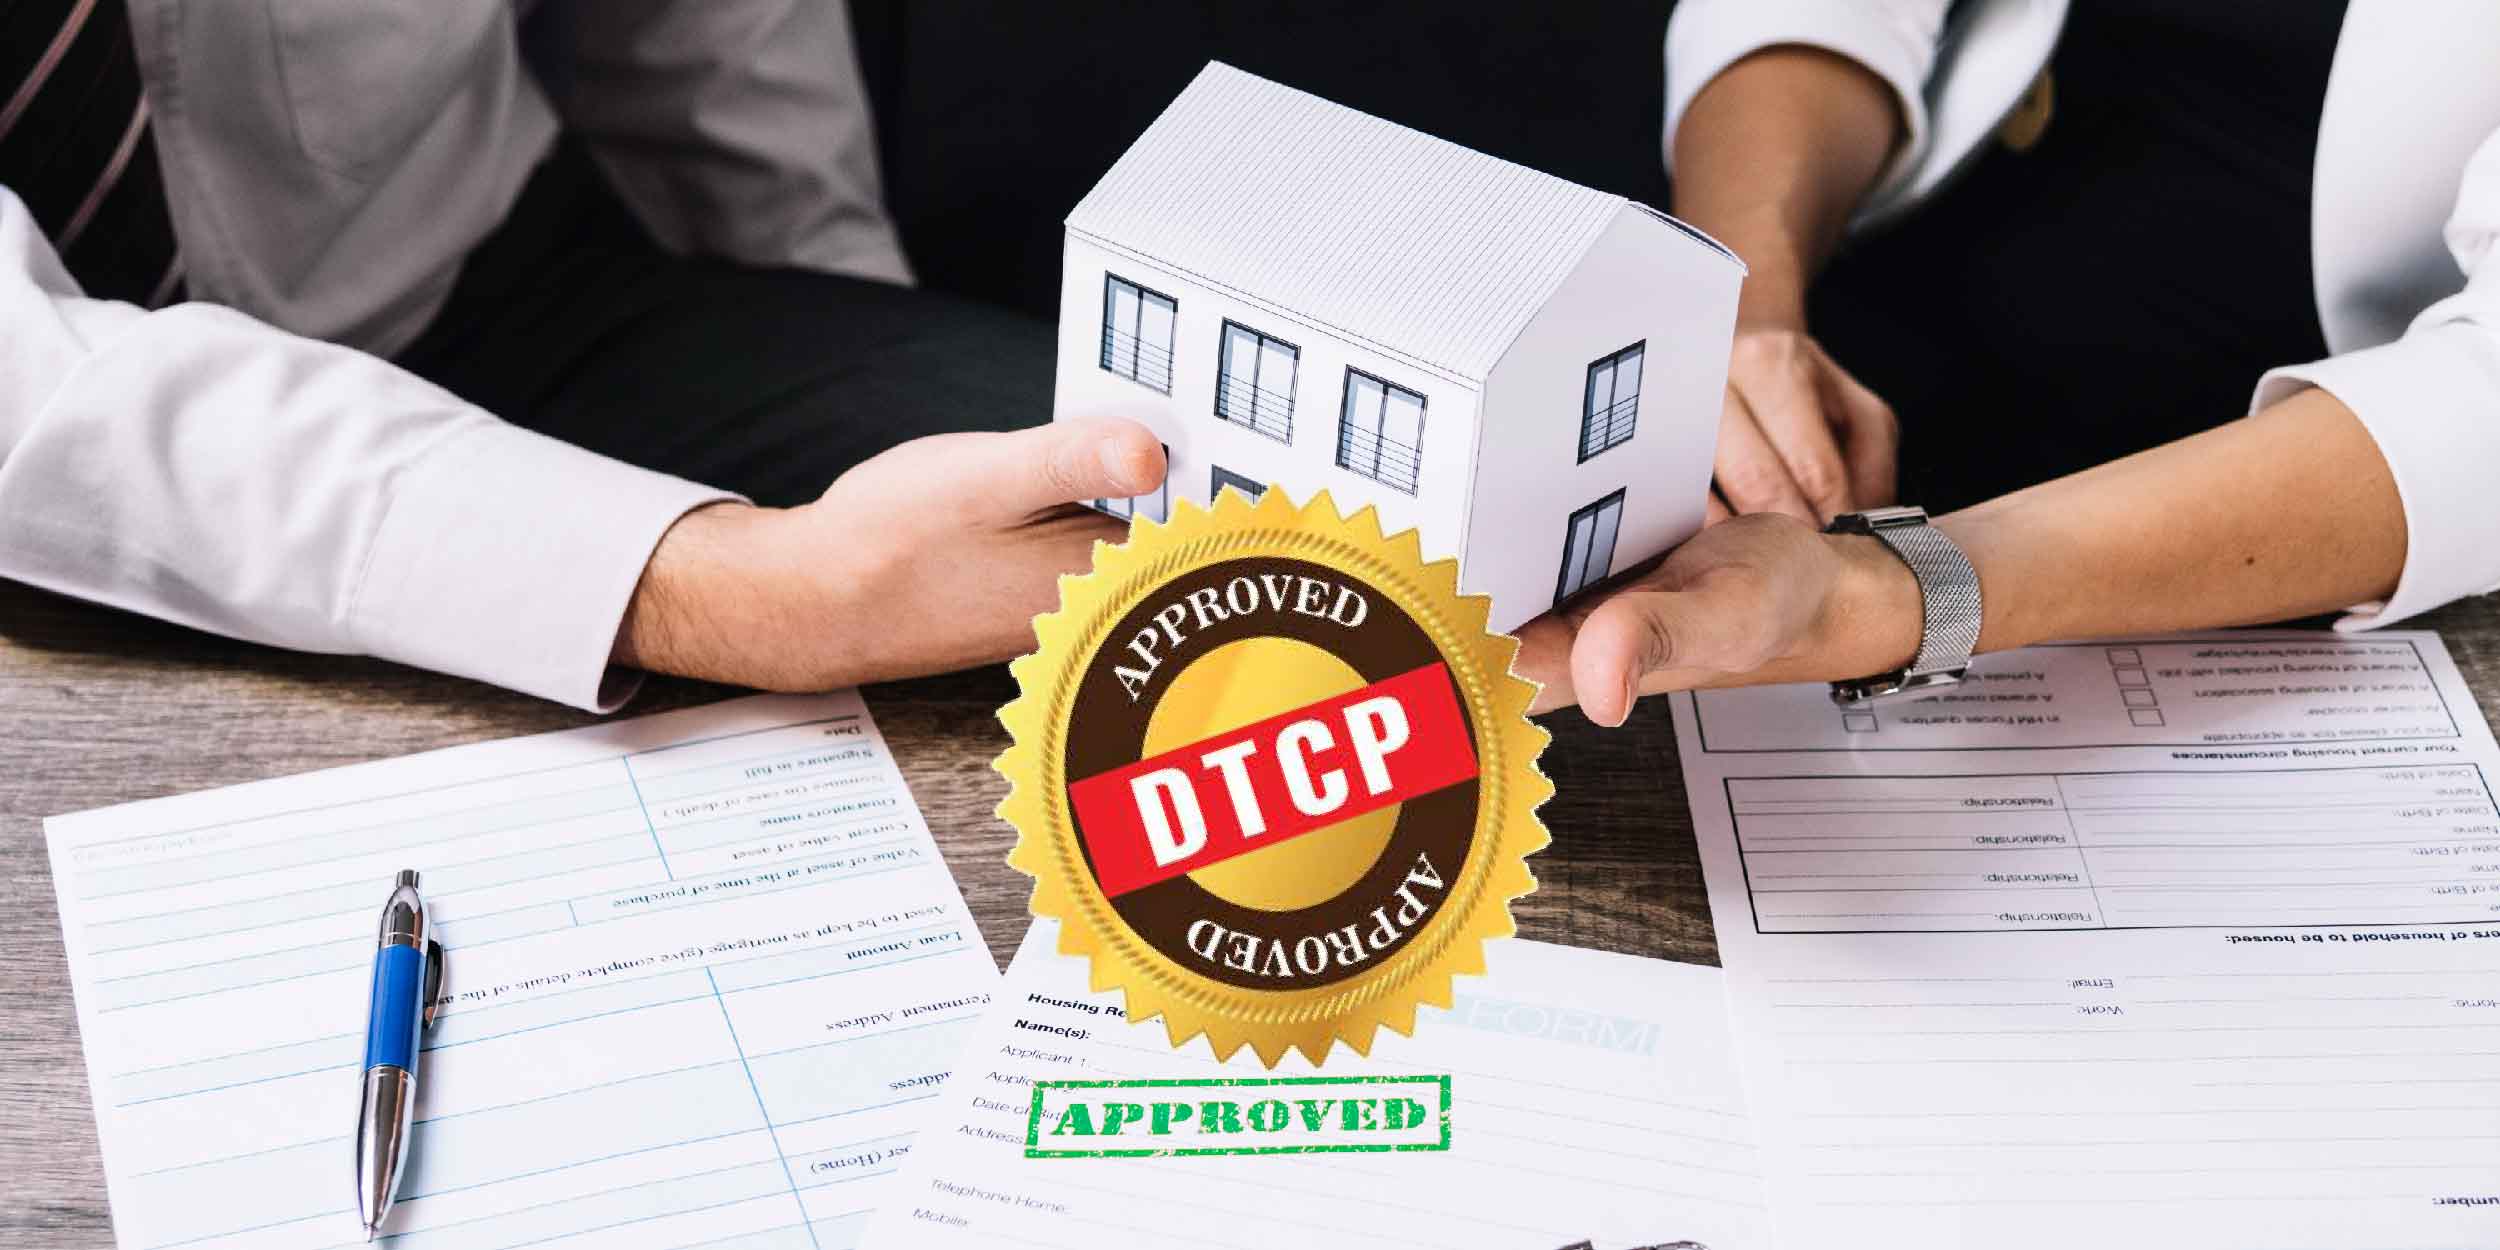 DTCP Building Approval Services in Chennai